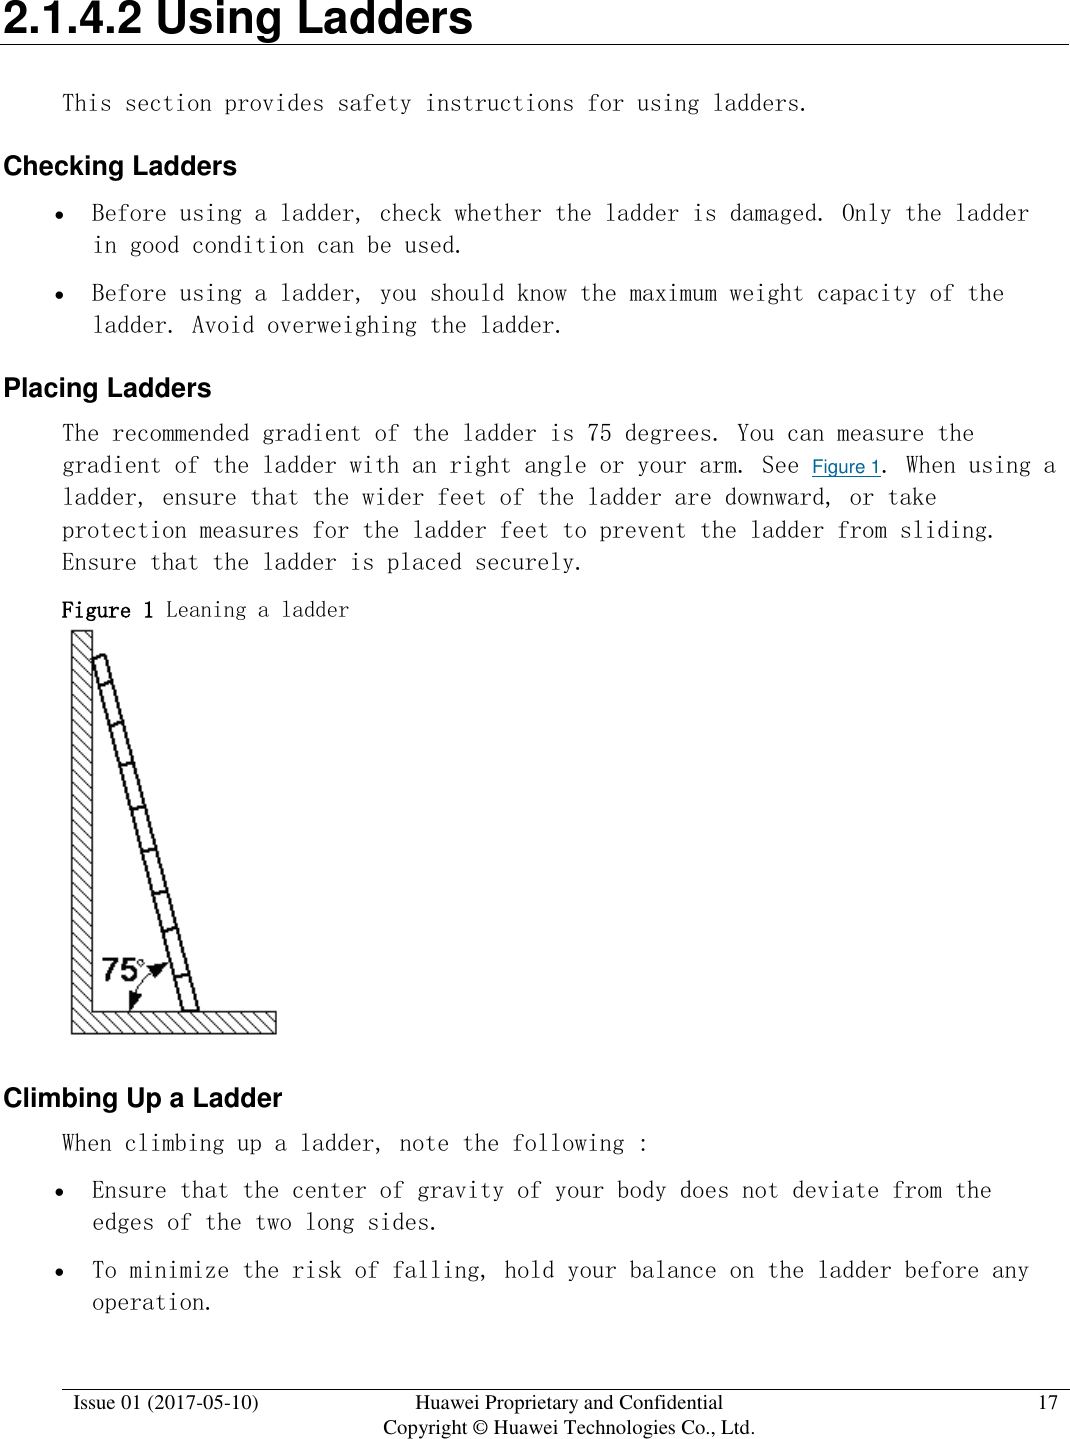  Issue 01 (2017-05-10) Huawei Proprietary and Confidential      Copyright © Huawei Technologies Co., Ltd. 17  2.1.4.2 Using Ladders This section provides safety instructions for using ladders. Checking Ladders  Before using a ladder, check whether the ladder is damaged. Only the ladder in good condition can be used.   Before using a ladder, you should know the maximum weight capacity of the ladder. Avoid overweighing the ladder.  Placing Ladders  The recommended gradient of the ladder is 75 degrees. You can measure the gradient of the ladder with an right angle or your arm. See Figure 1. When using a ladder, ensure that the wider feet of the ladder are downward, or take protection measures for the ladder feet to prevent the ladder from sliding. Ensure that the ladder is placed securely.  Figure 1 Leaning a ladder   Climbing Up a Ladder When climbing up a ladder, note the following :   Ensure that the center of gravity of your body does not deviate from the edges of the two long sides.   To minimize the risk of falling, hold your balance on the ladder before any operation. 